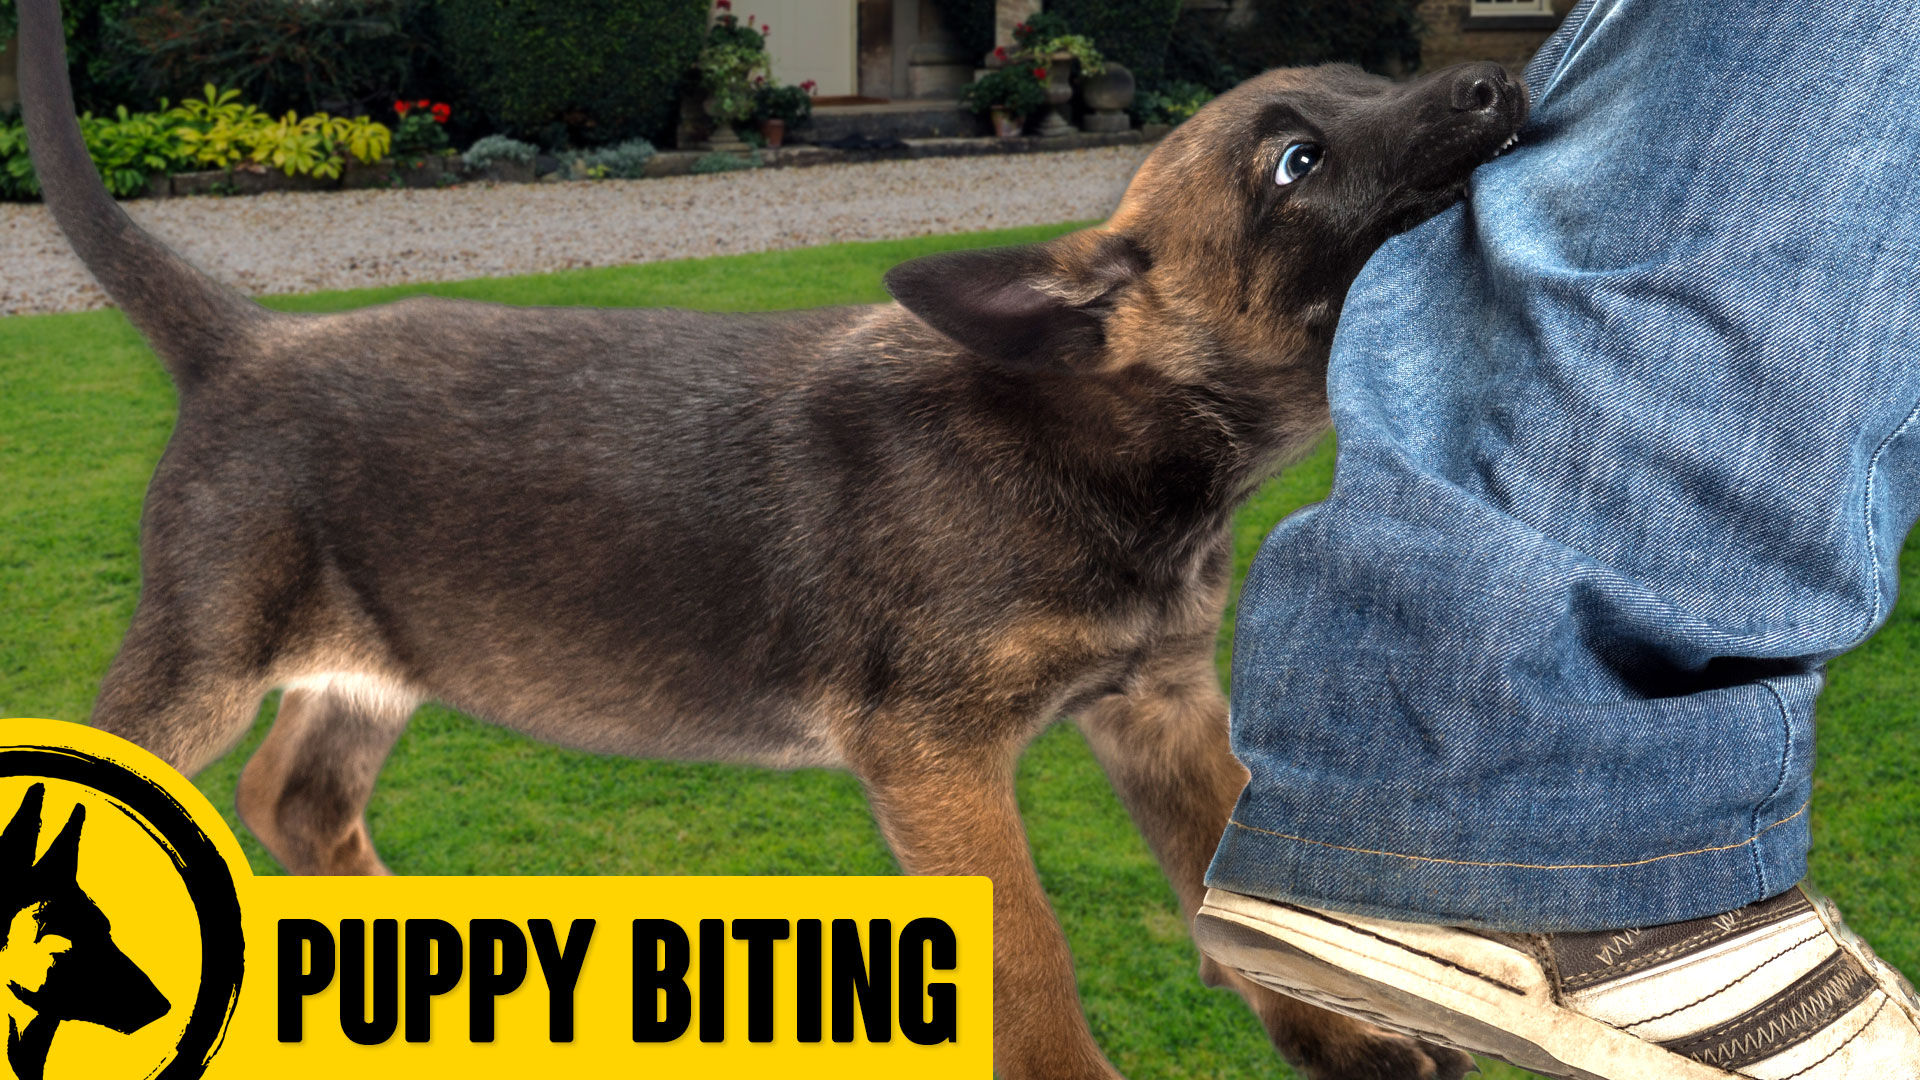 How to STOP Puppy Biting